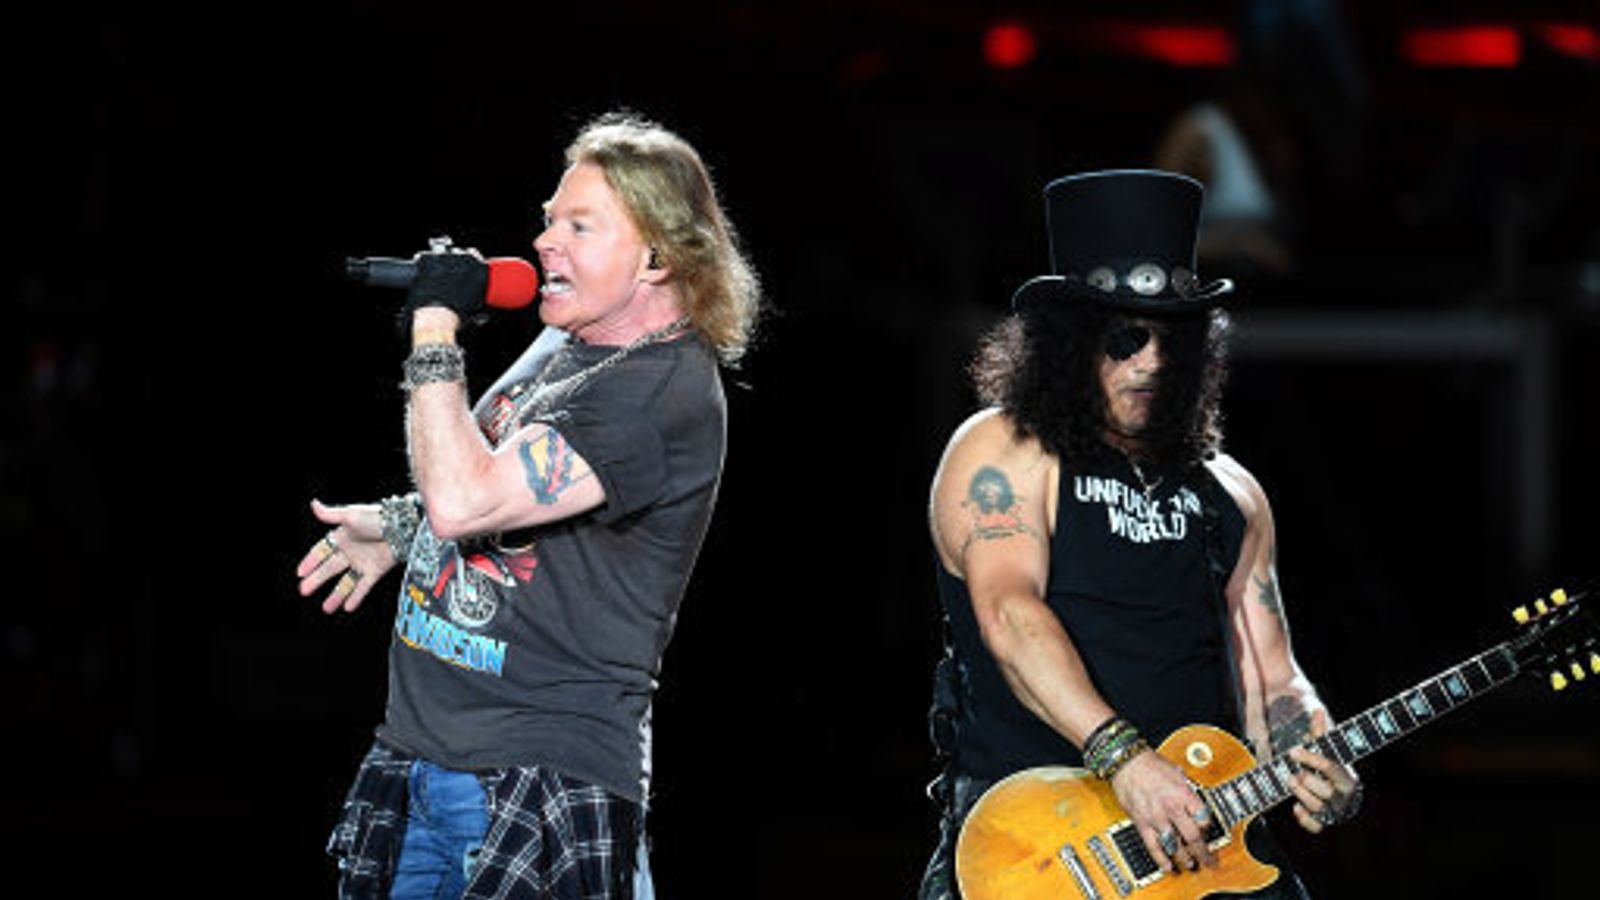 No new Guns N' Roses songs have been written, says Slash